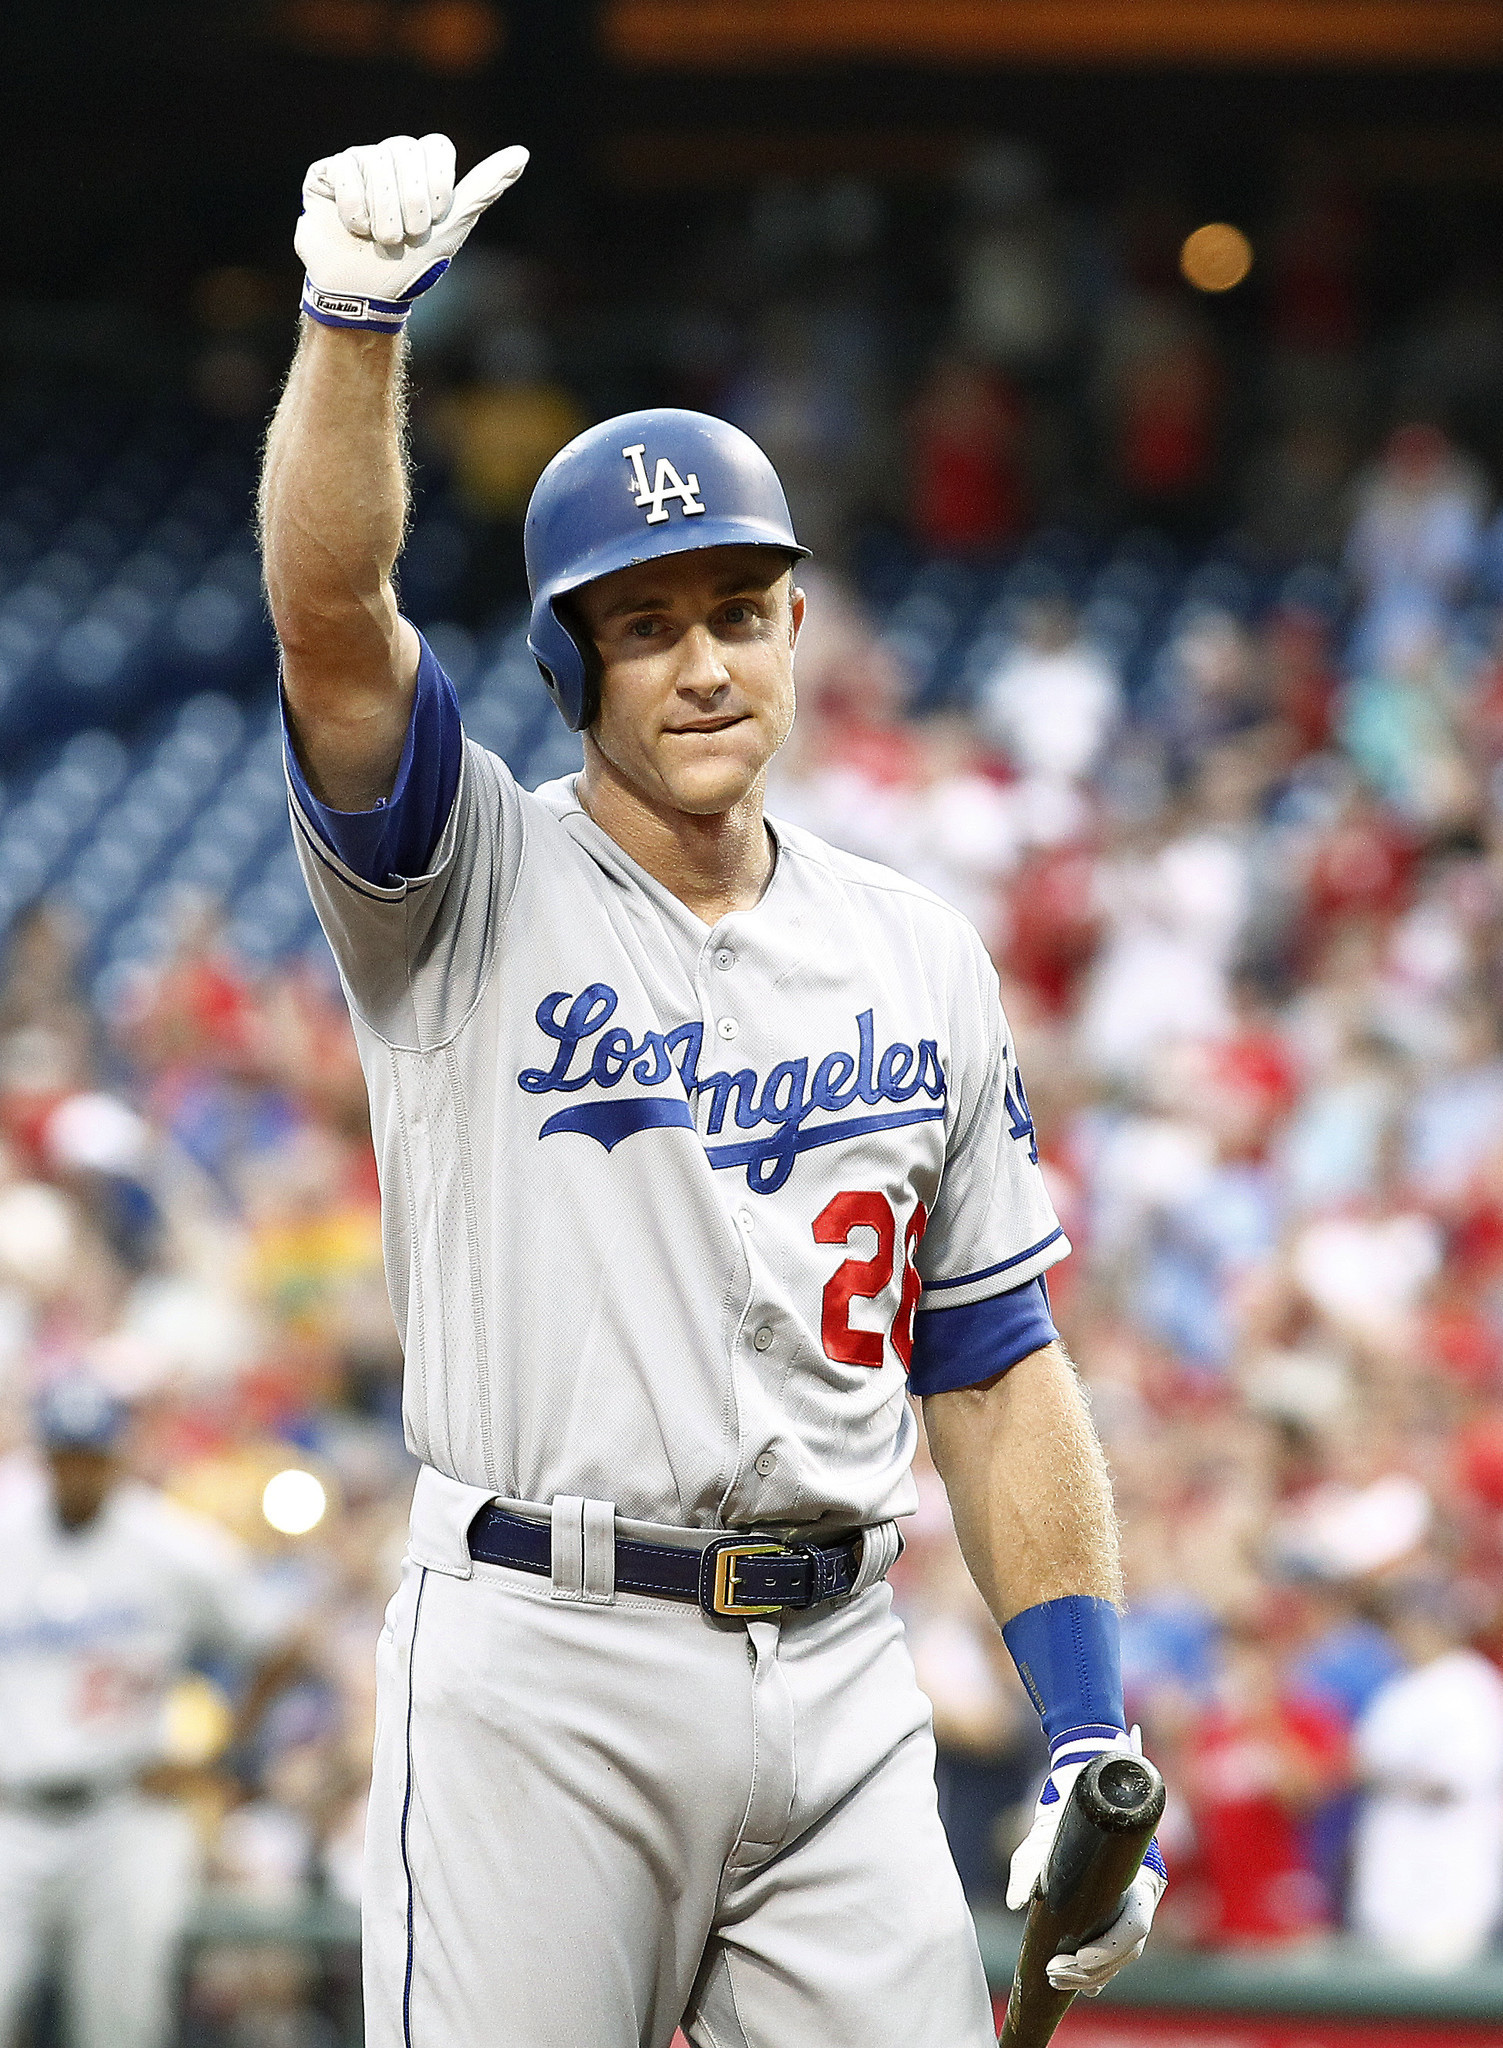 Chase Utley receives overdue farewell while putting on a show - The